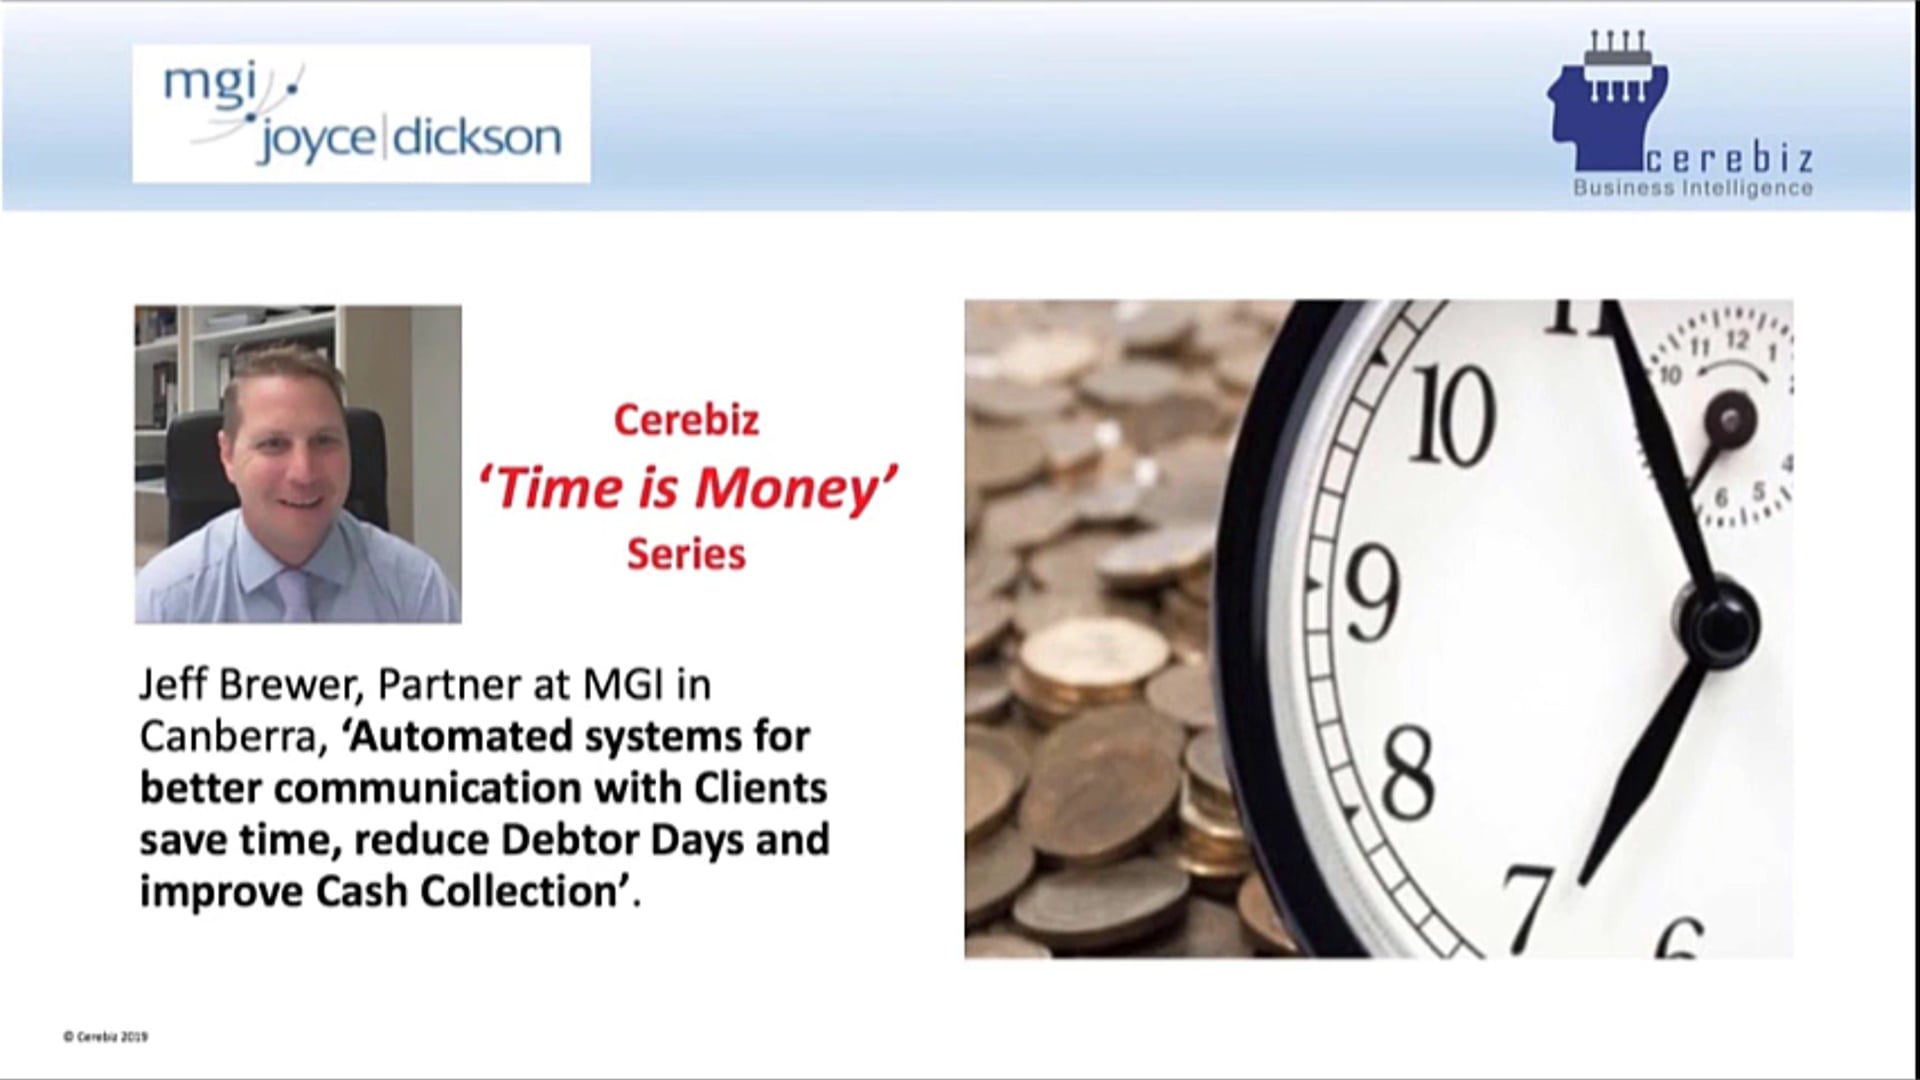 MGI JoyceDickson - Full interview: Automation helps Collect Our Cash Sooner